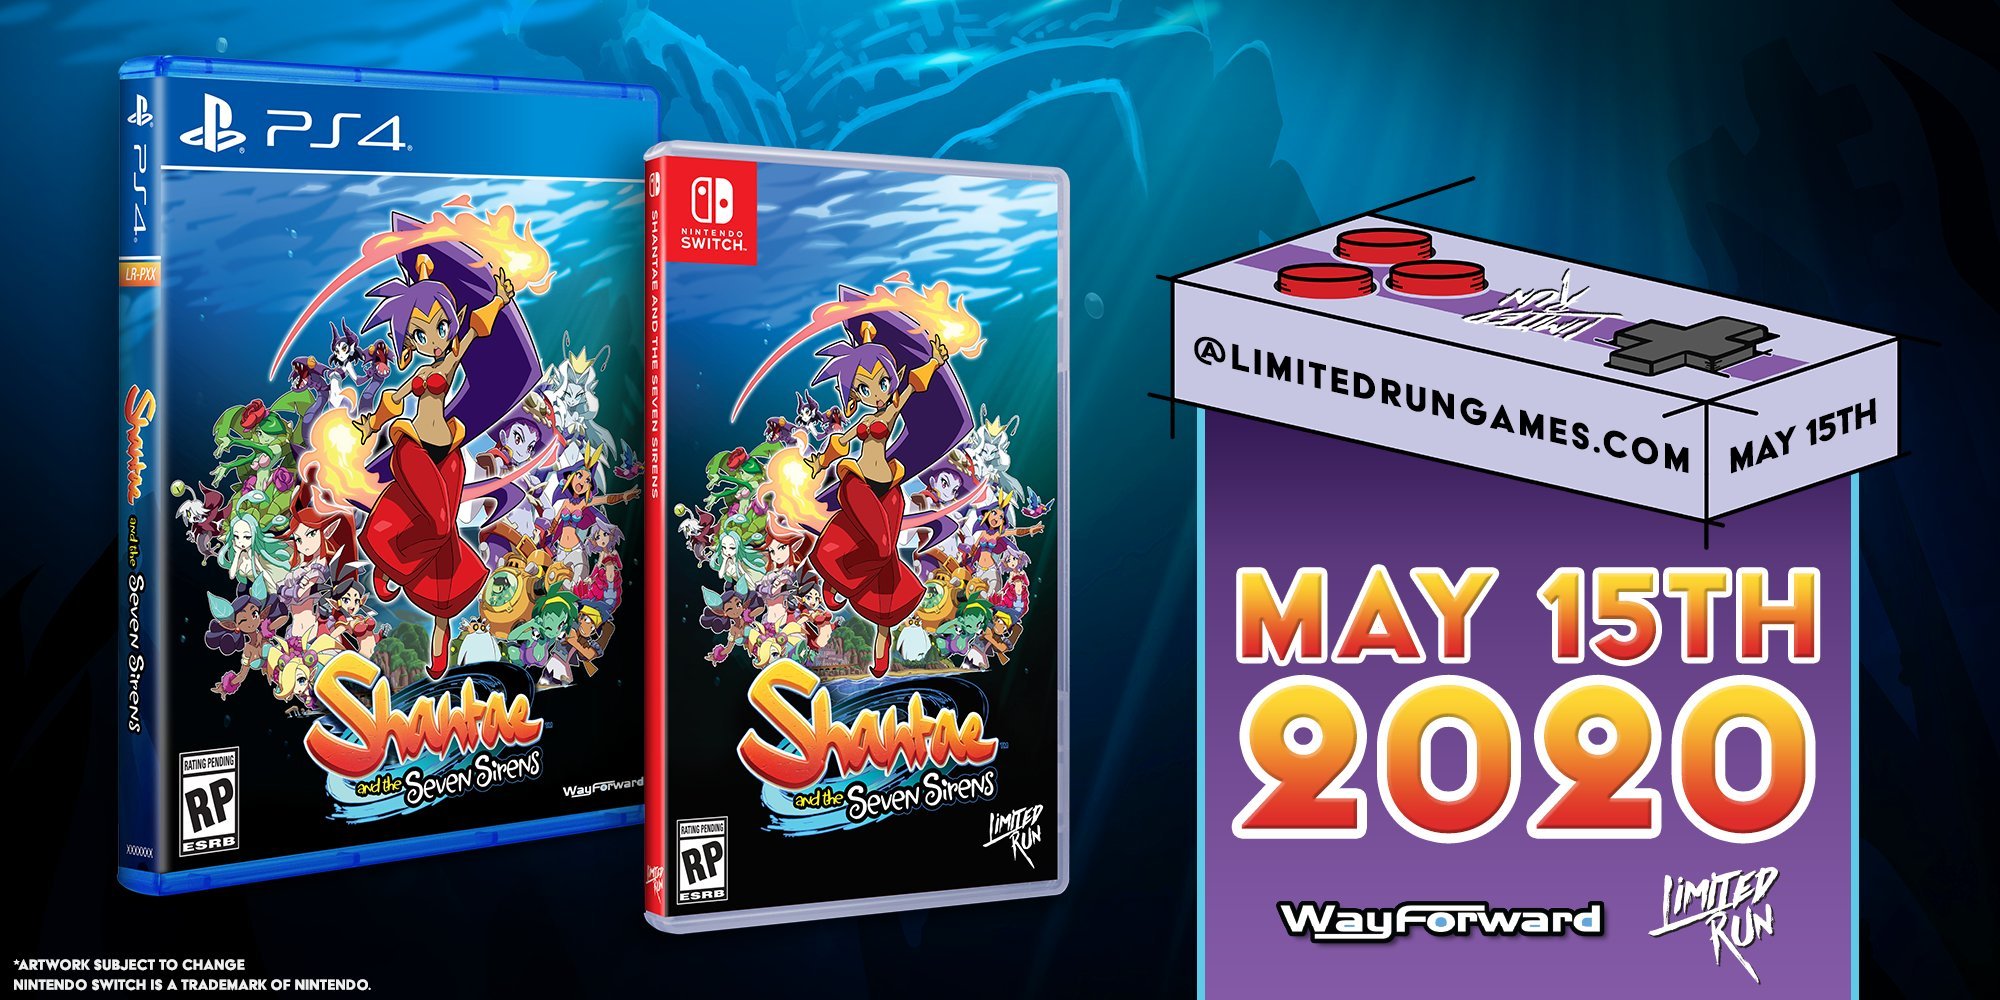 Shantae and the Seven Sirens PS4 and Switch limited print physical edition pre-orders open May 15